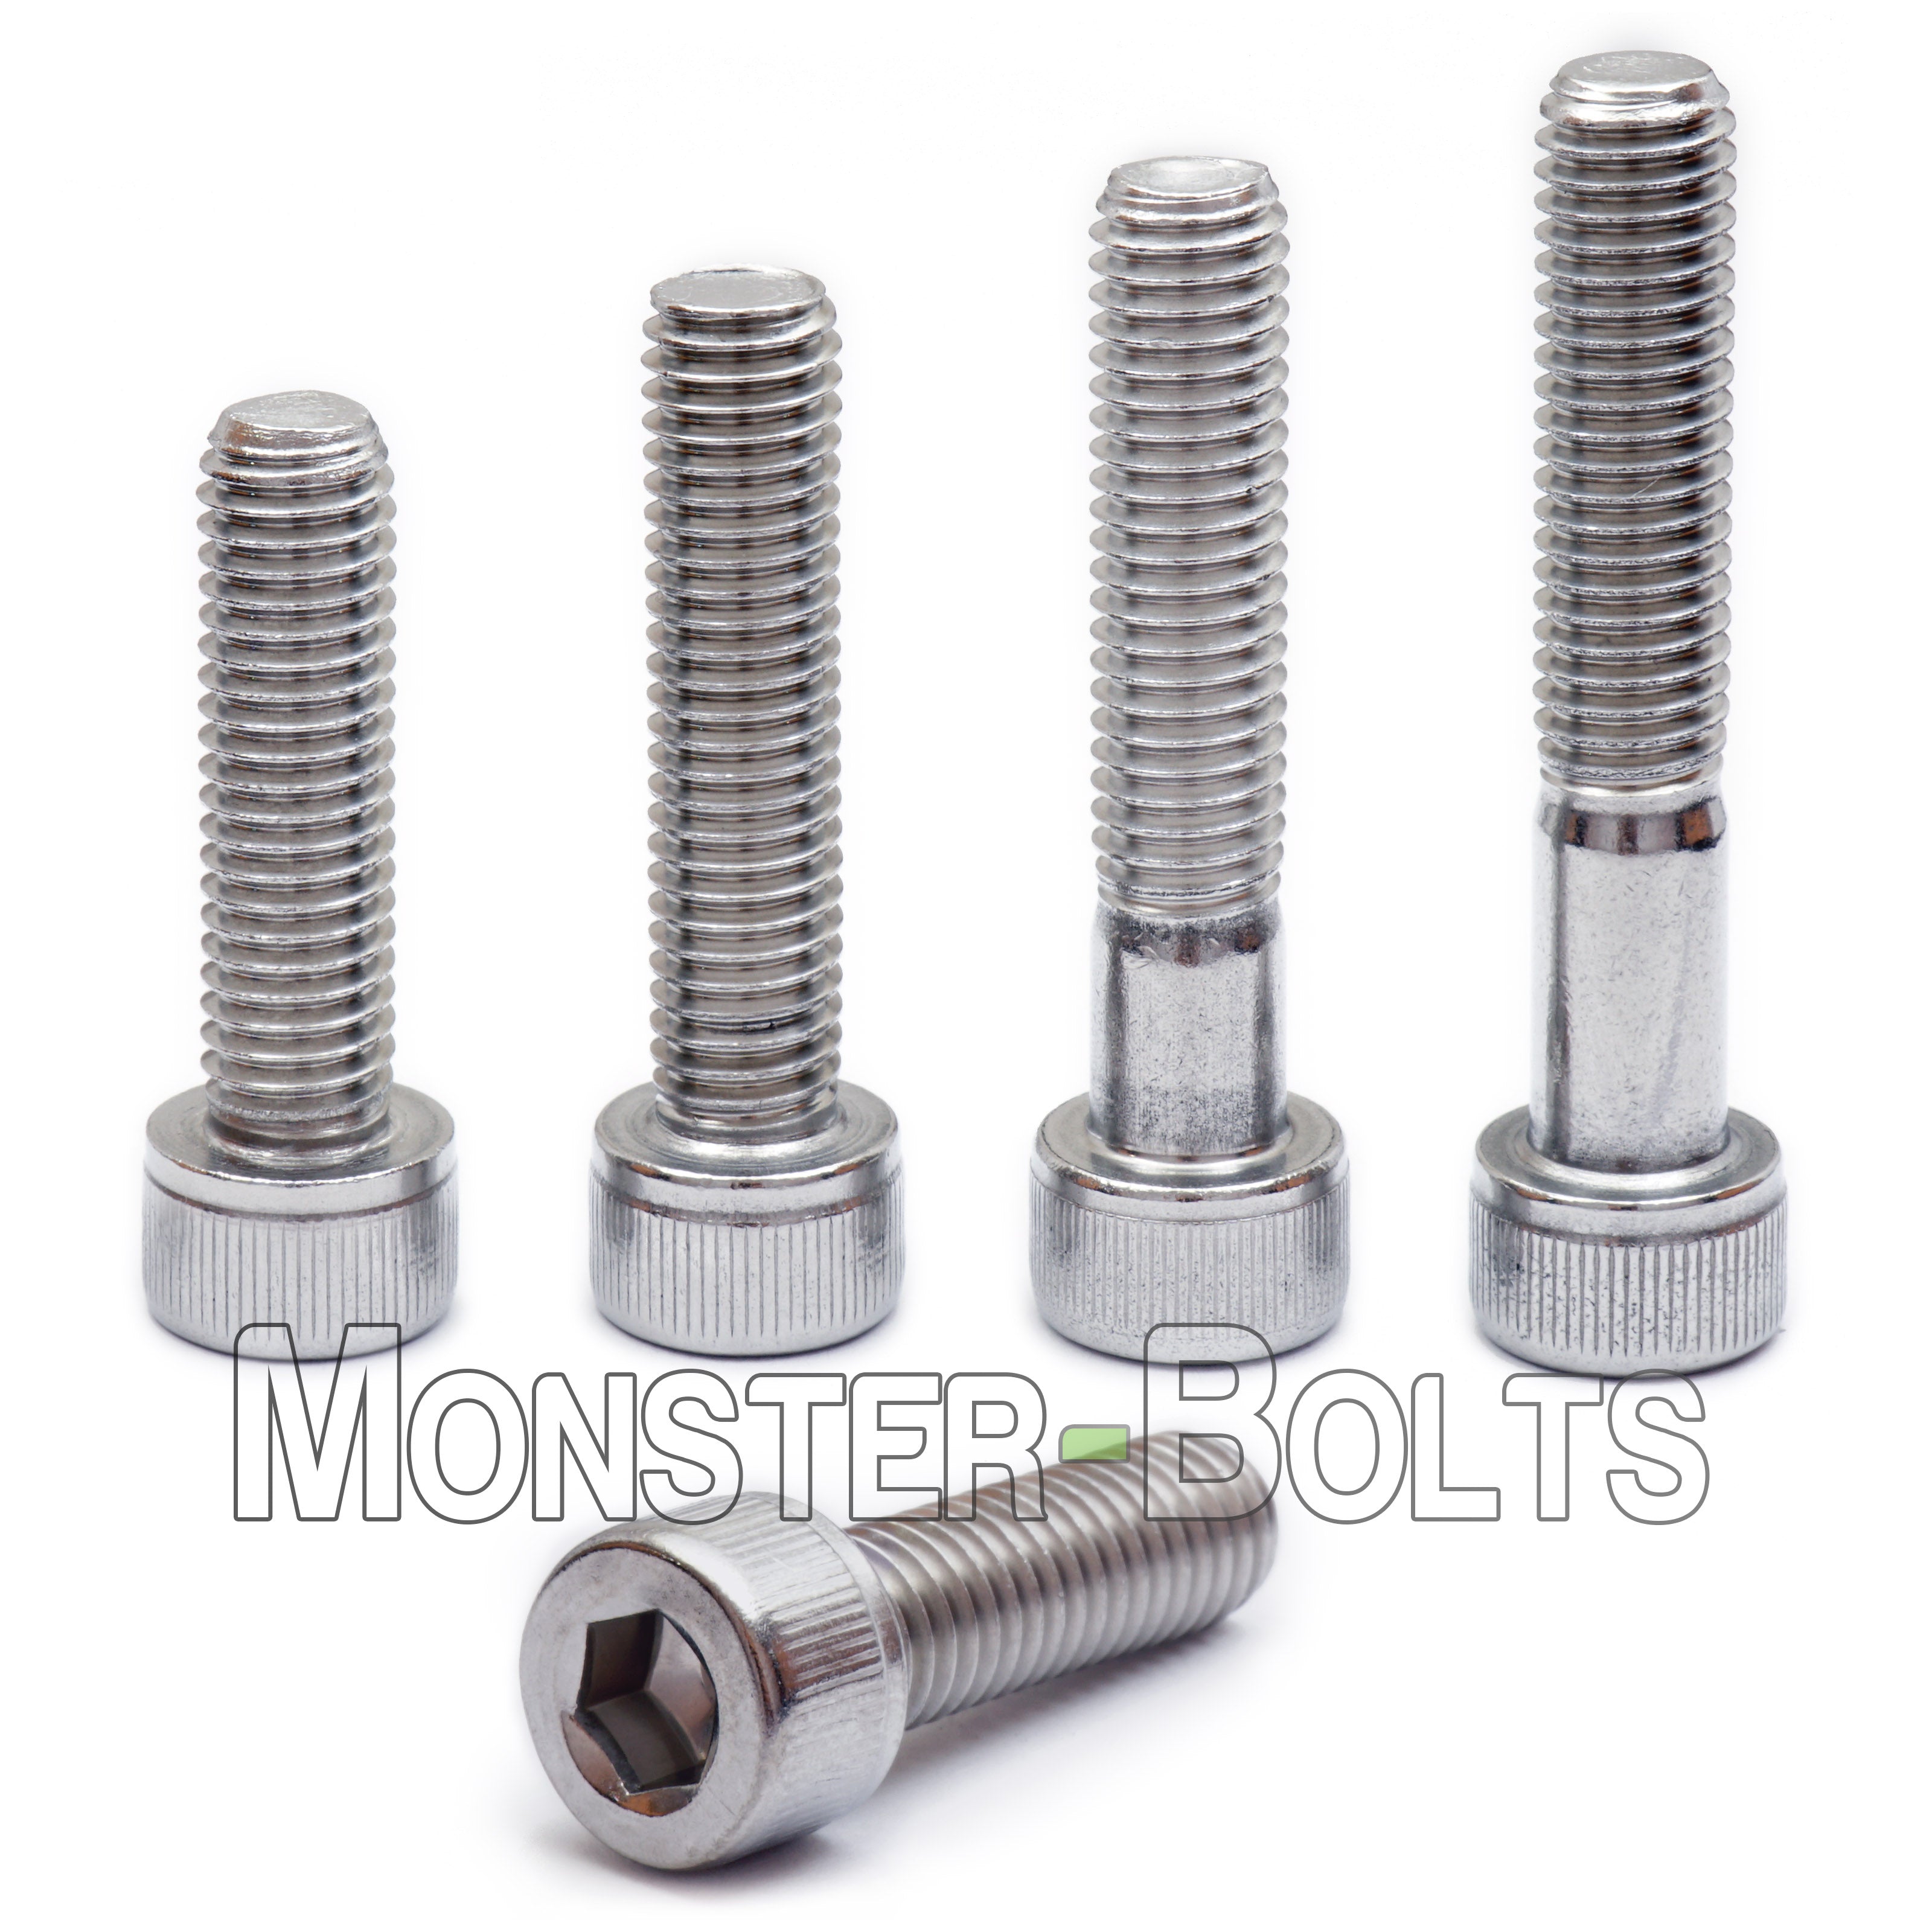 PACK OF 25 NEW 5/16 X 1 1/8" SOCKET HEAD CAP SCREW ZINC PLATED FREE SHIPPING NH